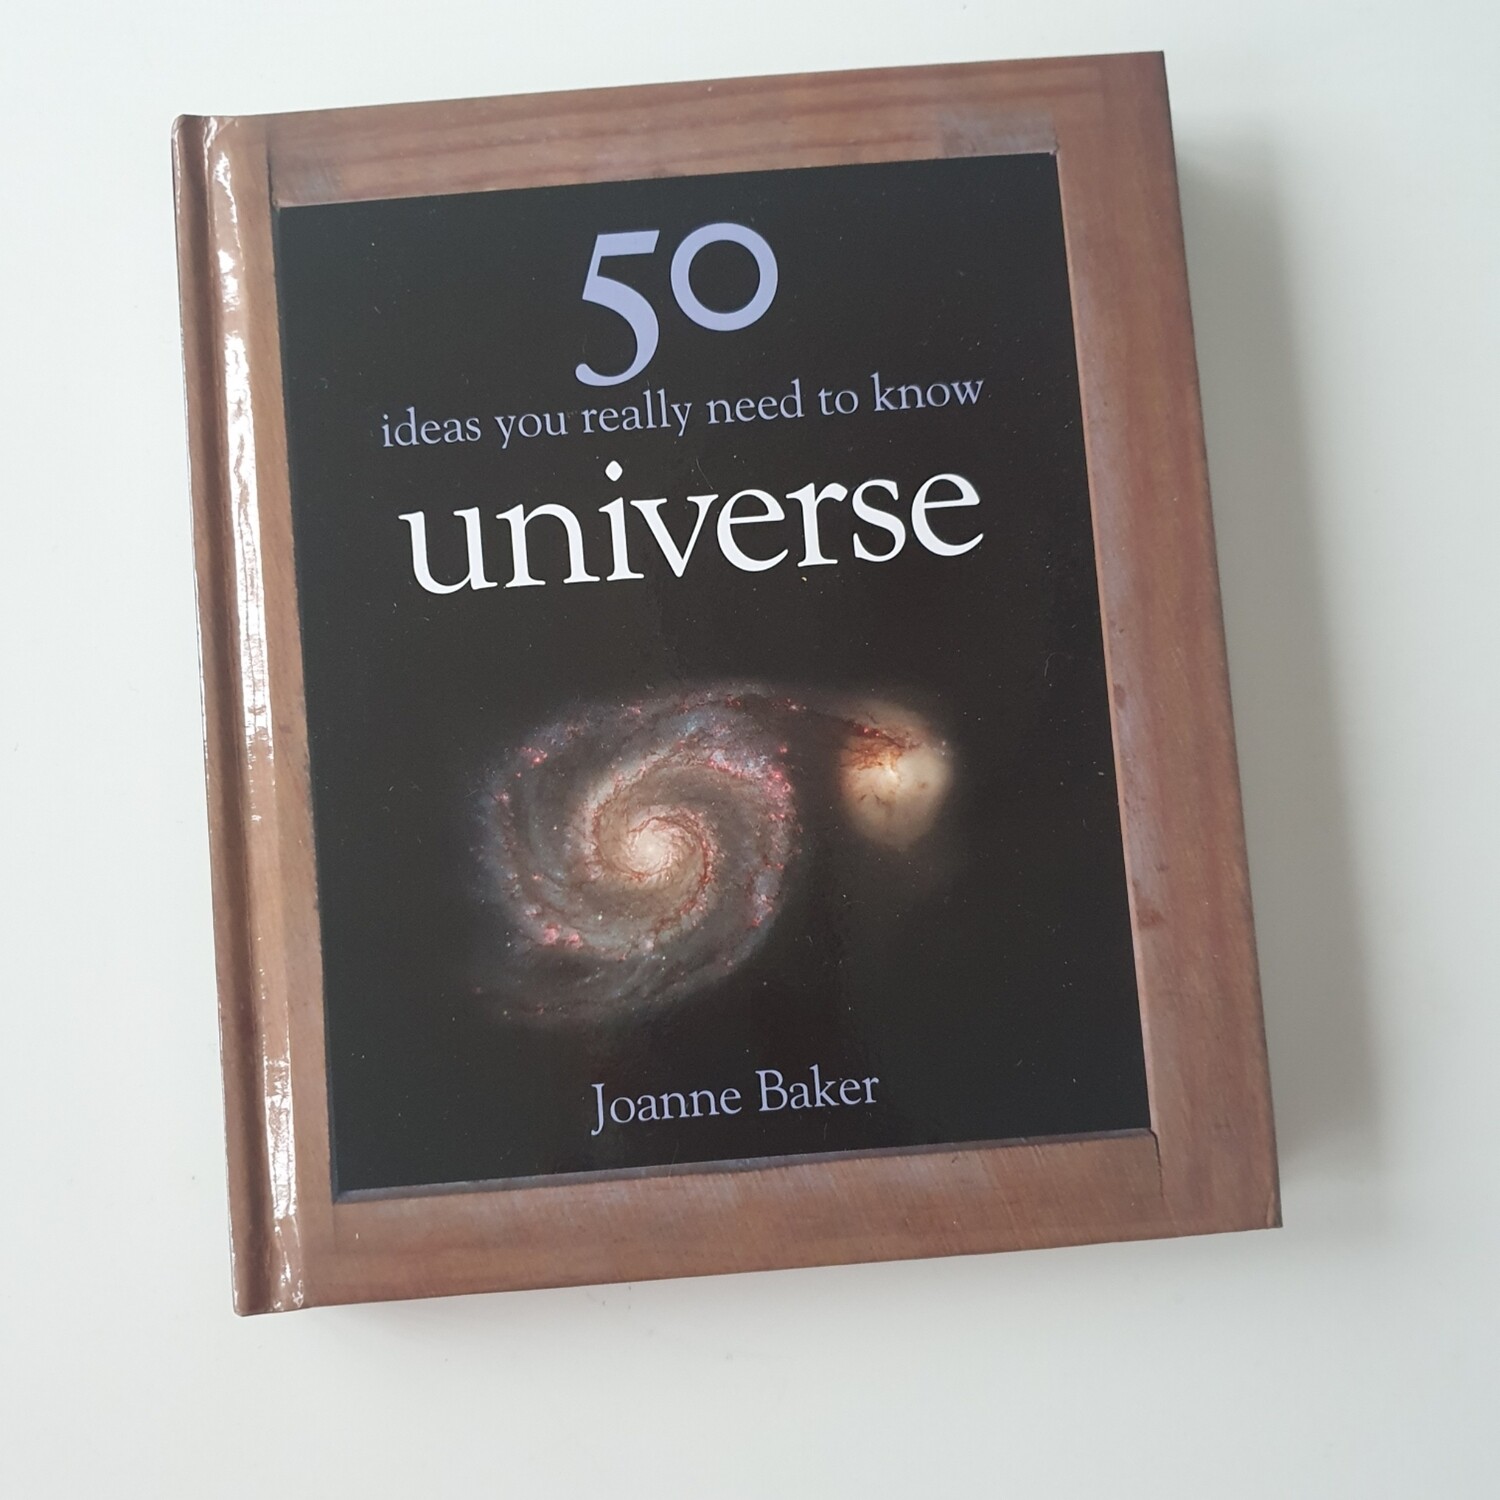 Universe - 50 ideas you really need to know